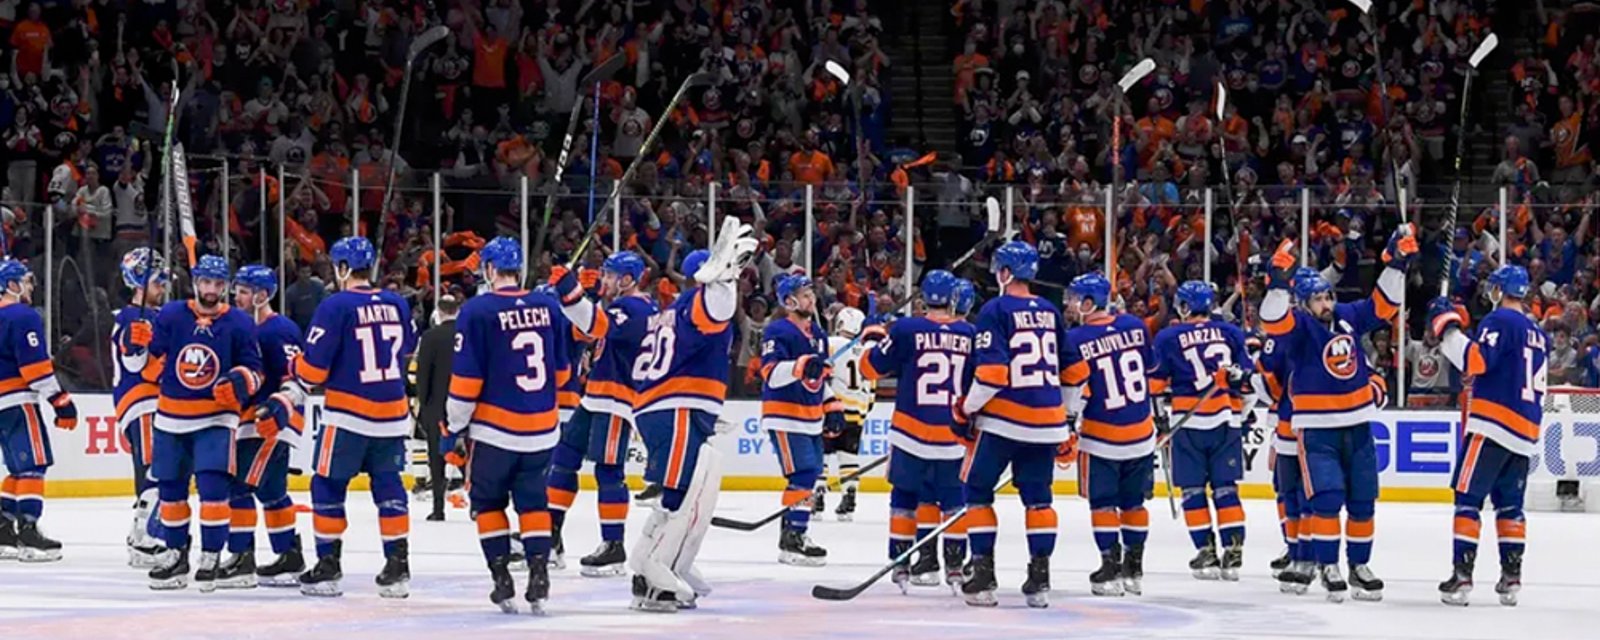 Islanders players sound off after signing new deals 